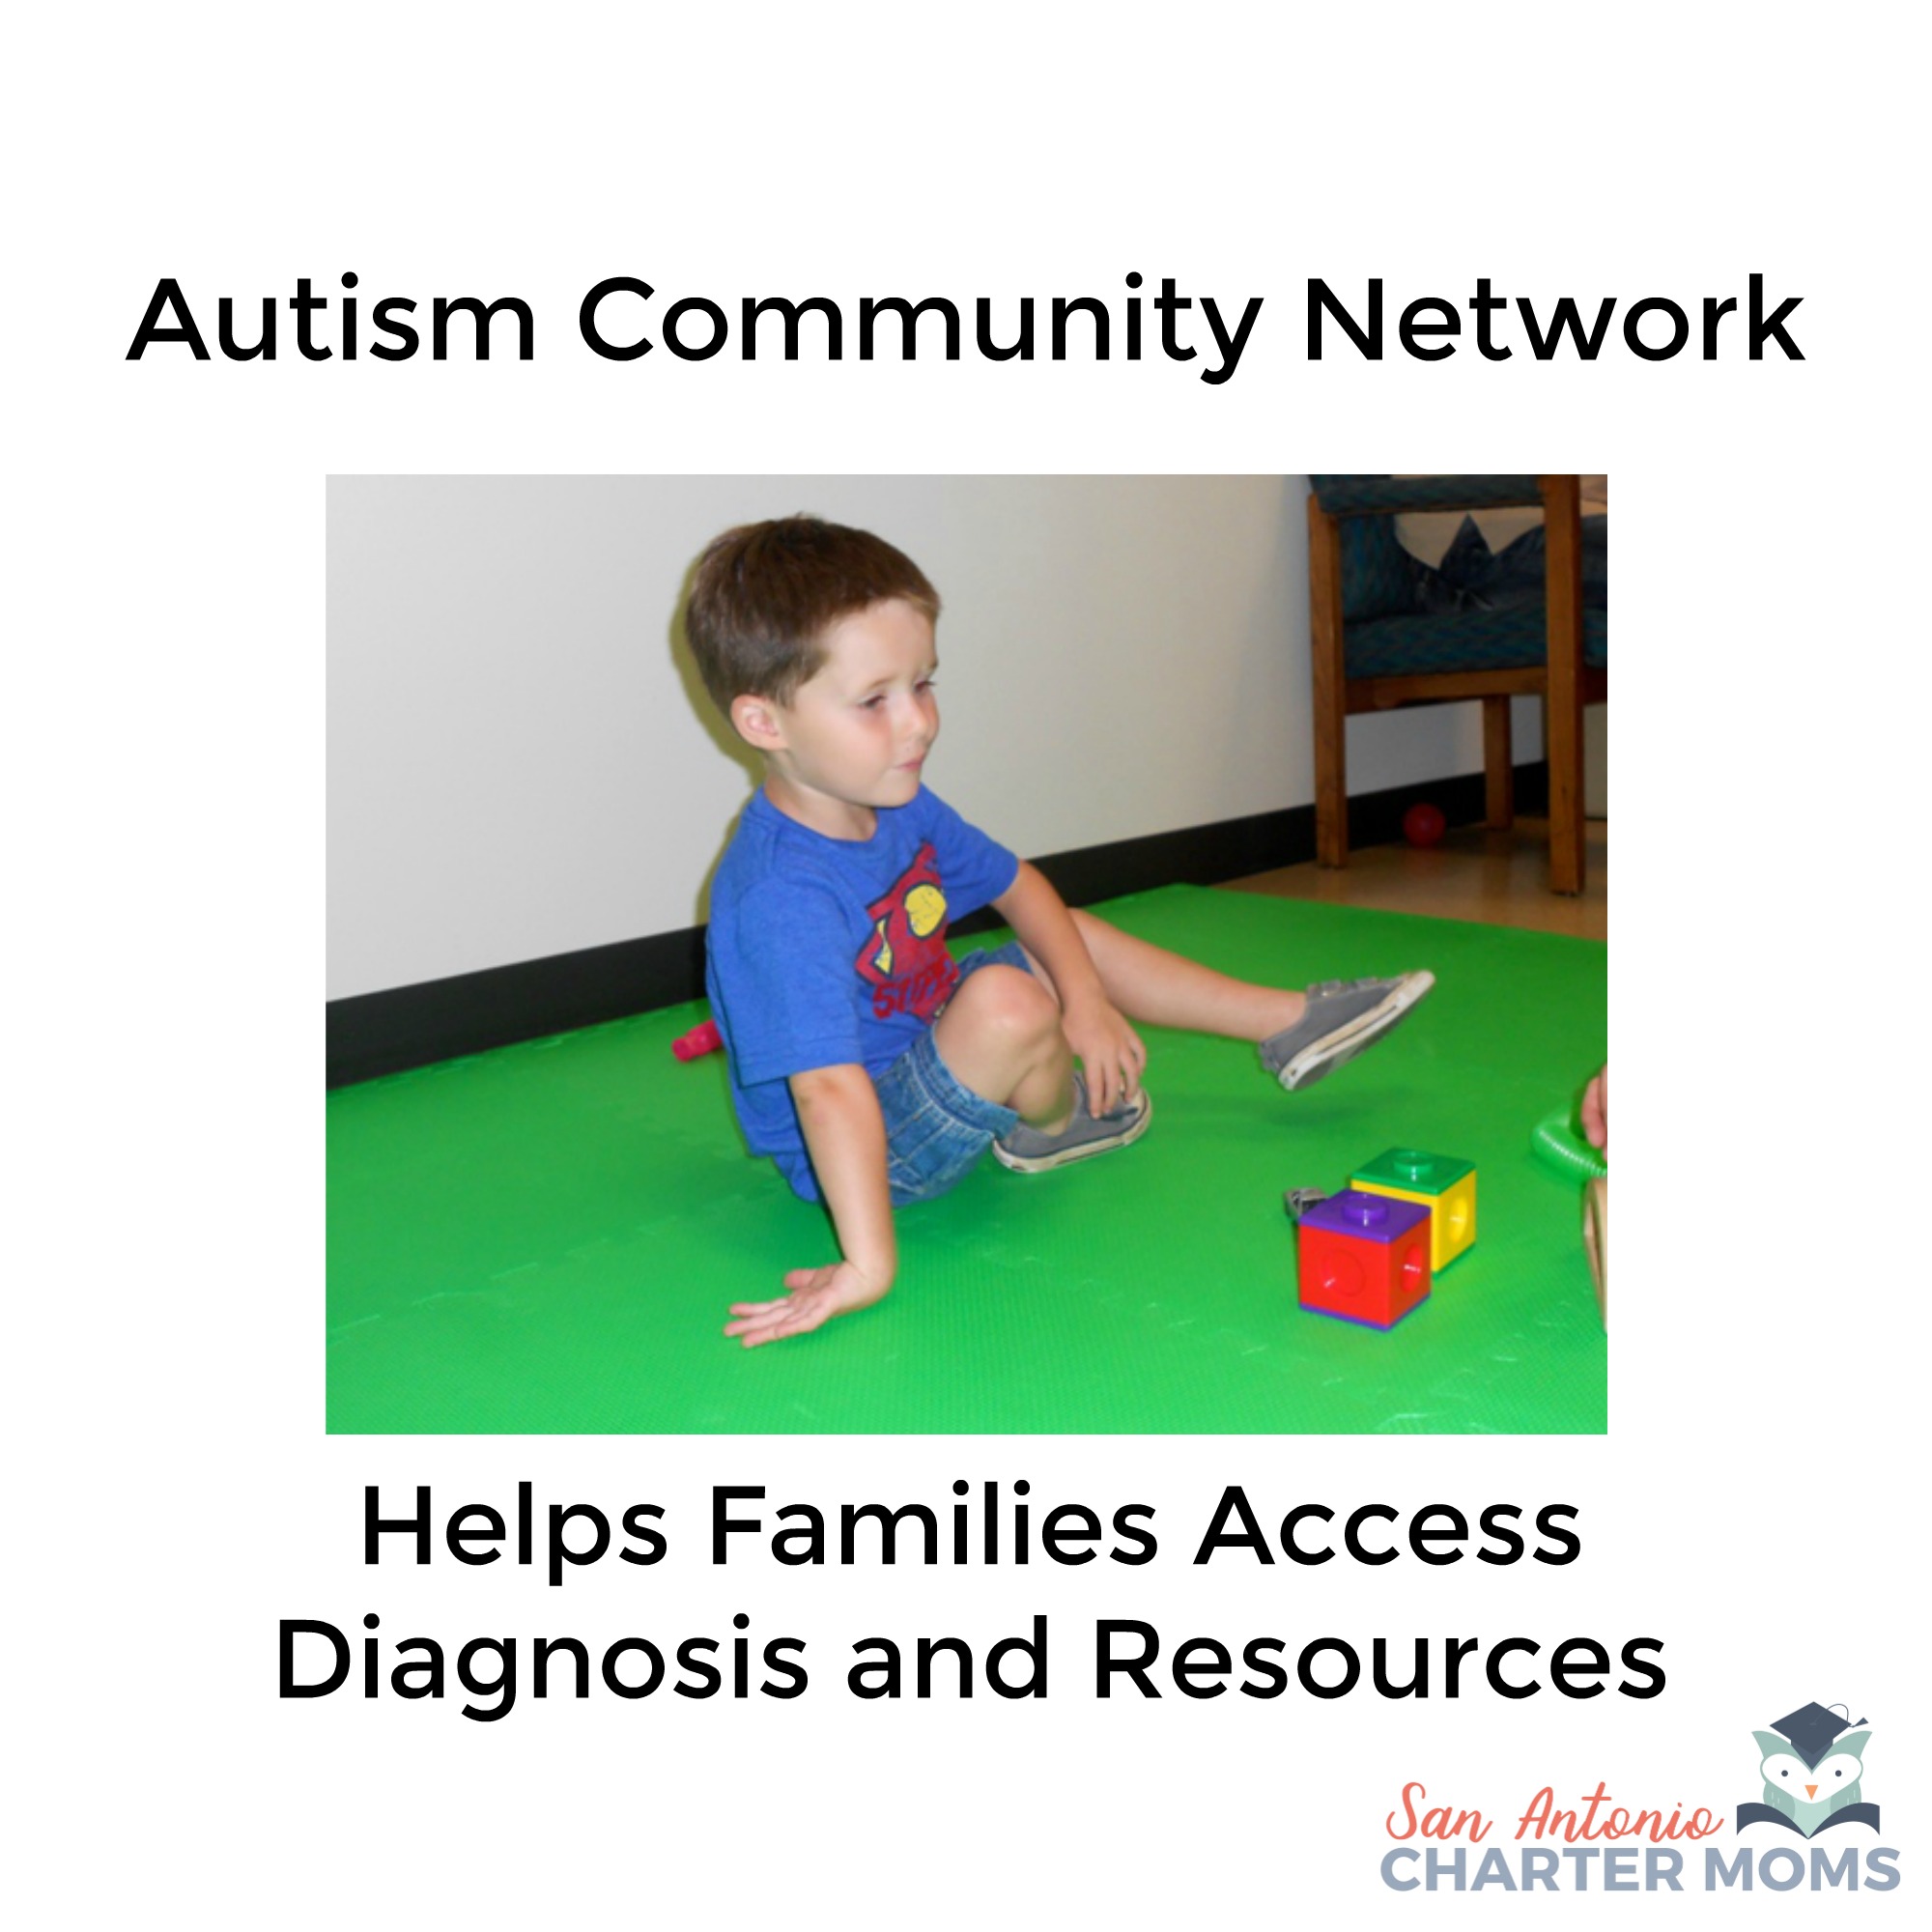 Autism Community Network Helps Families Access Diagnosis and Resources | San Antonio Charter Moms